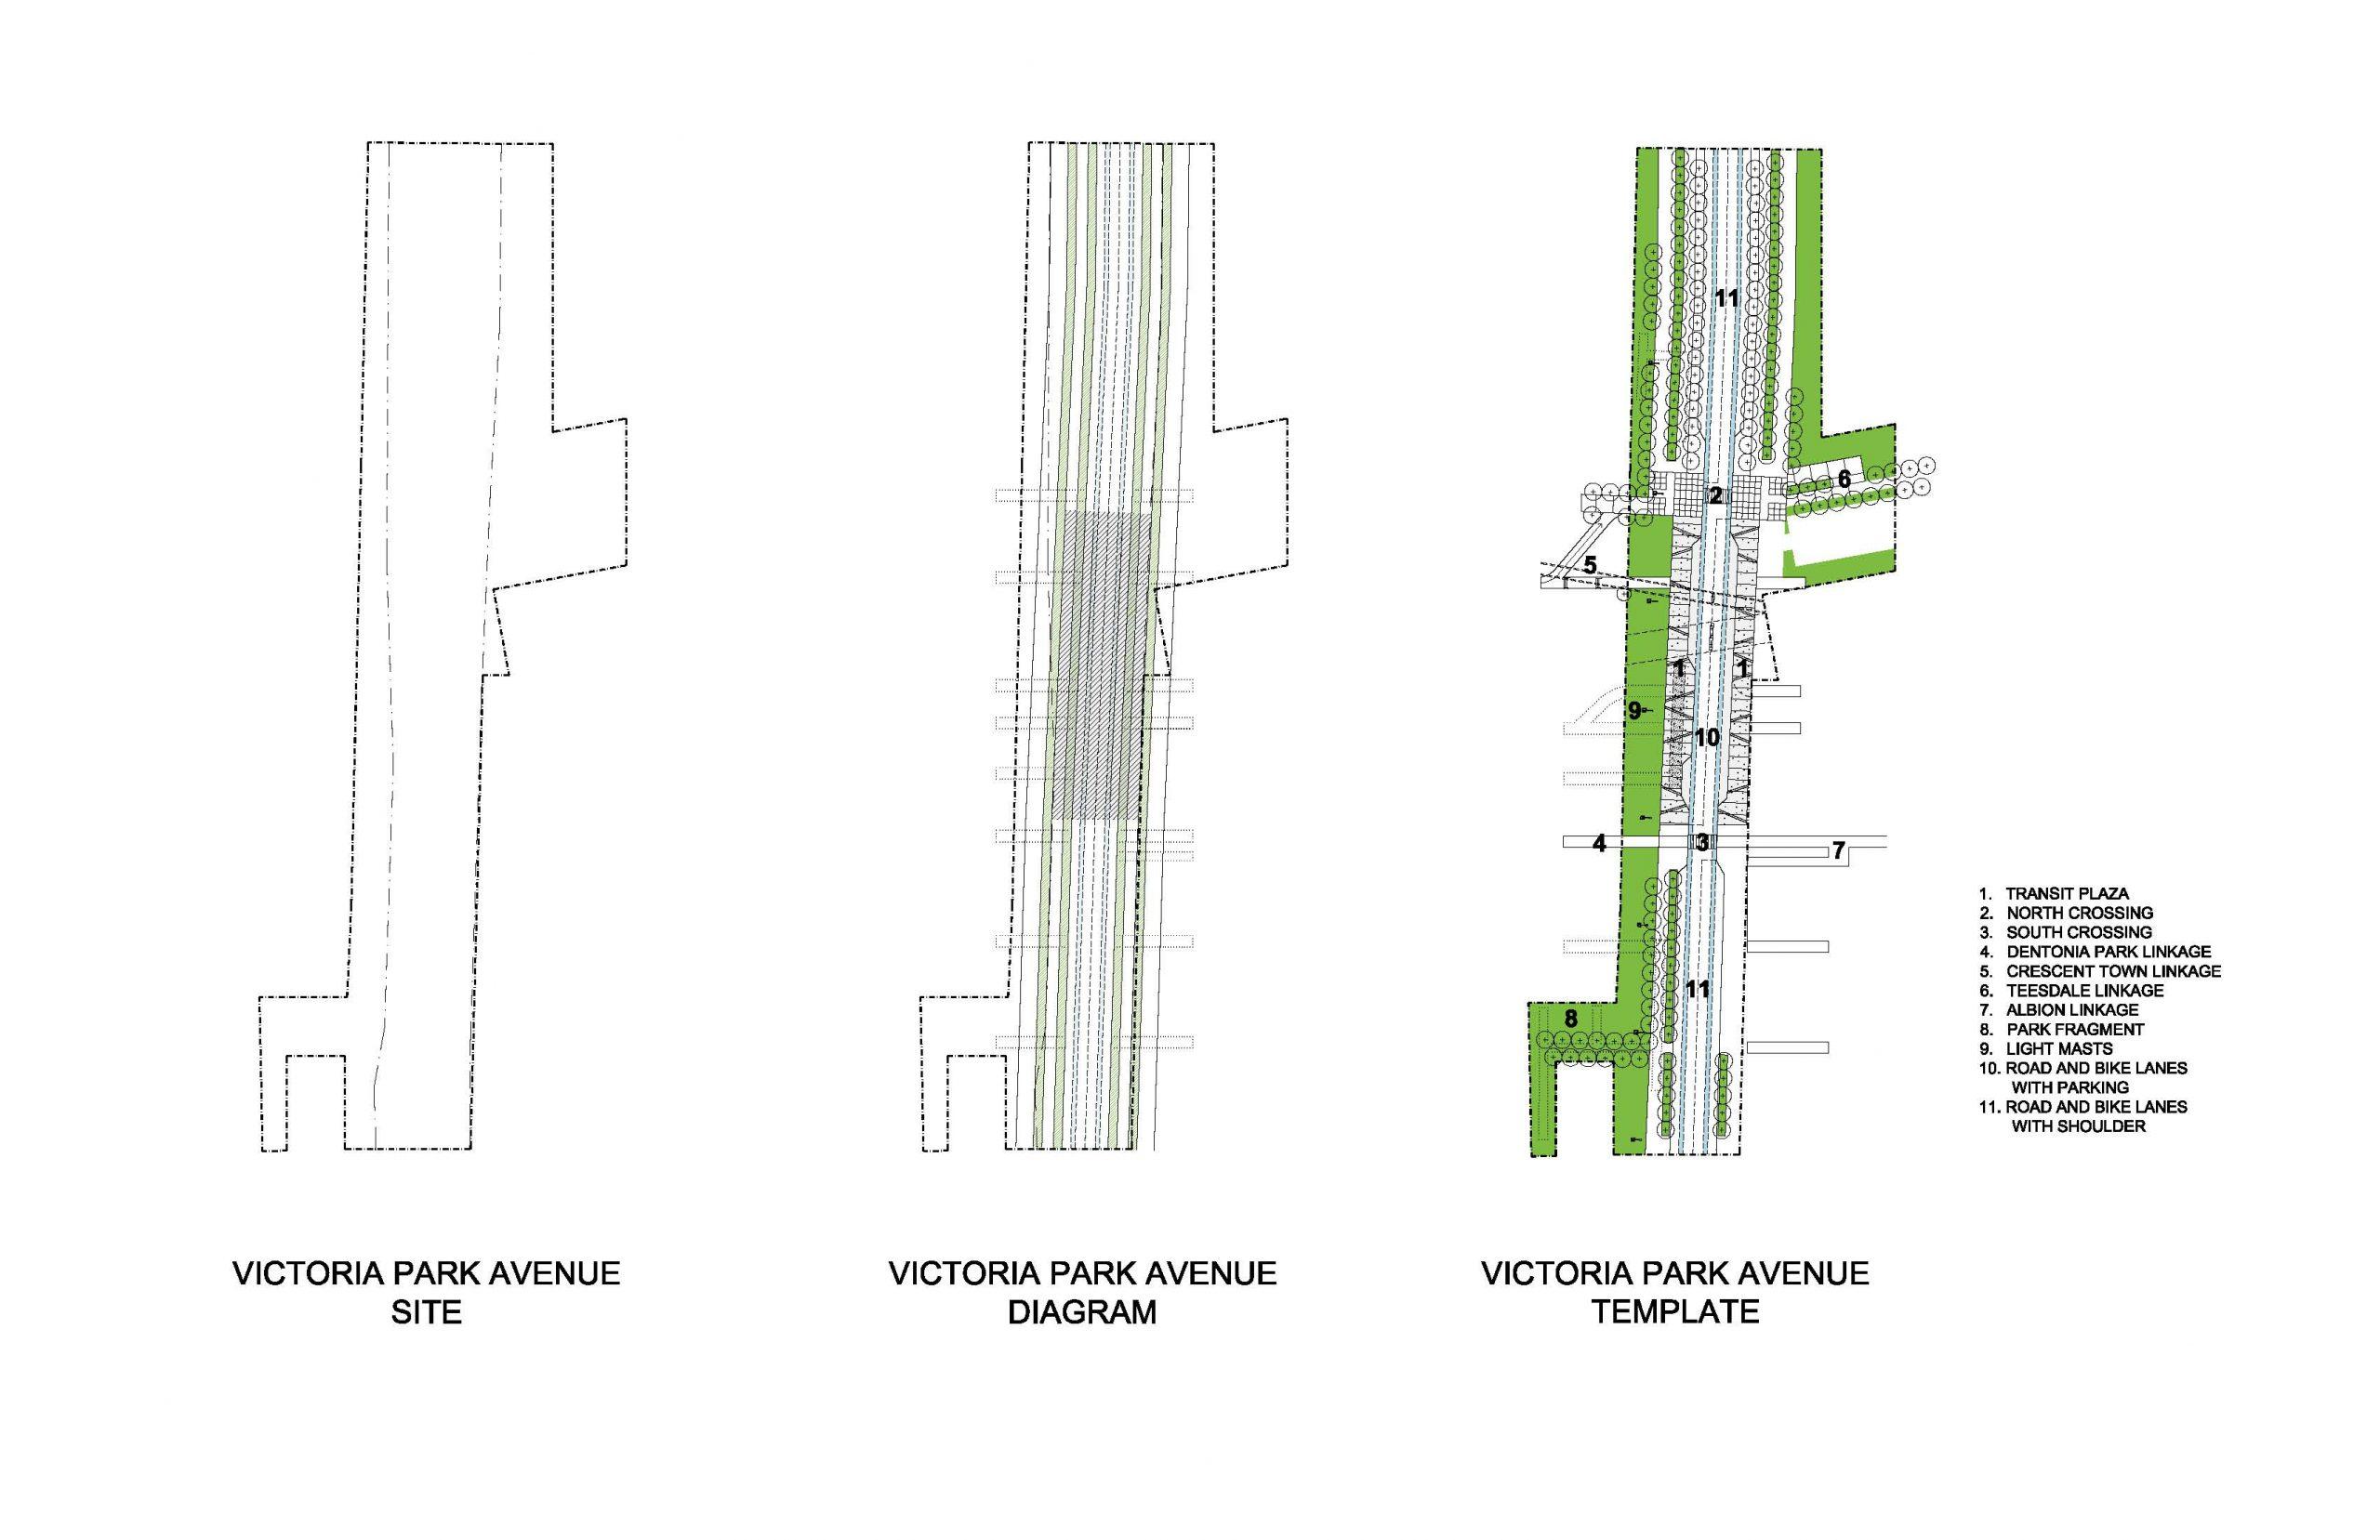 Public Transit and Urban Design Improvements: Victoria Park Ave and Warden Ave